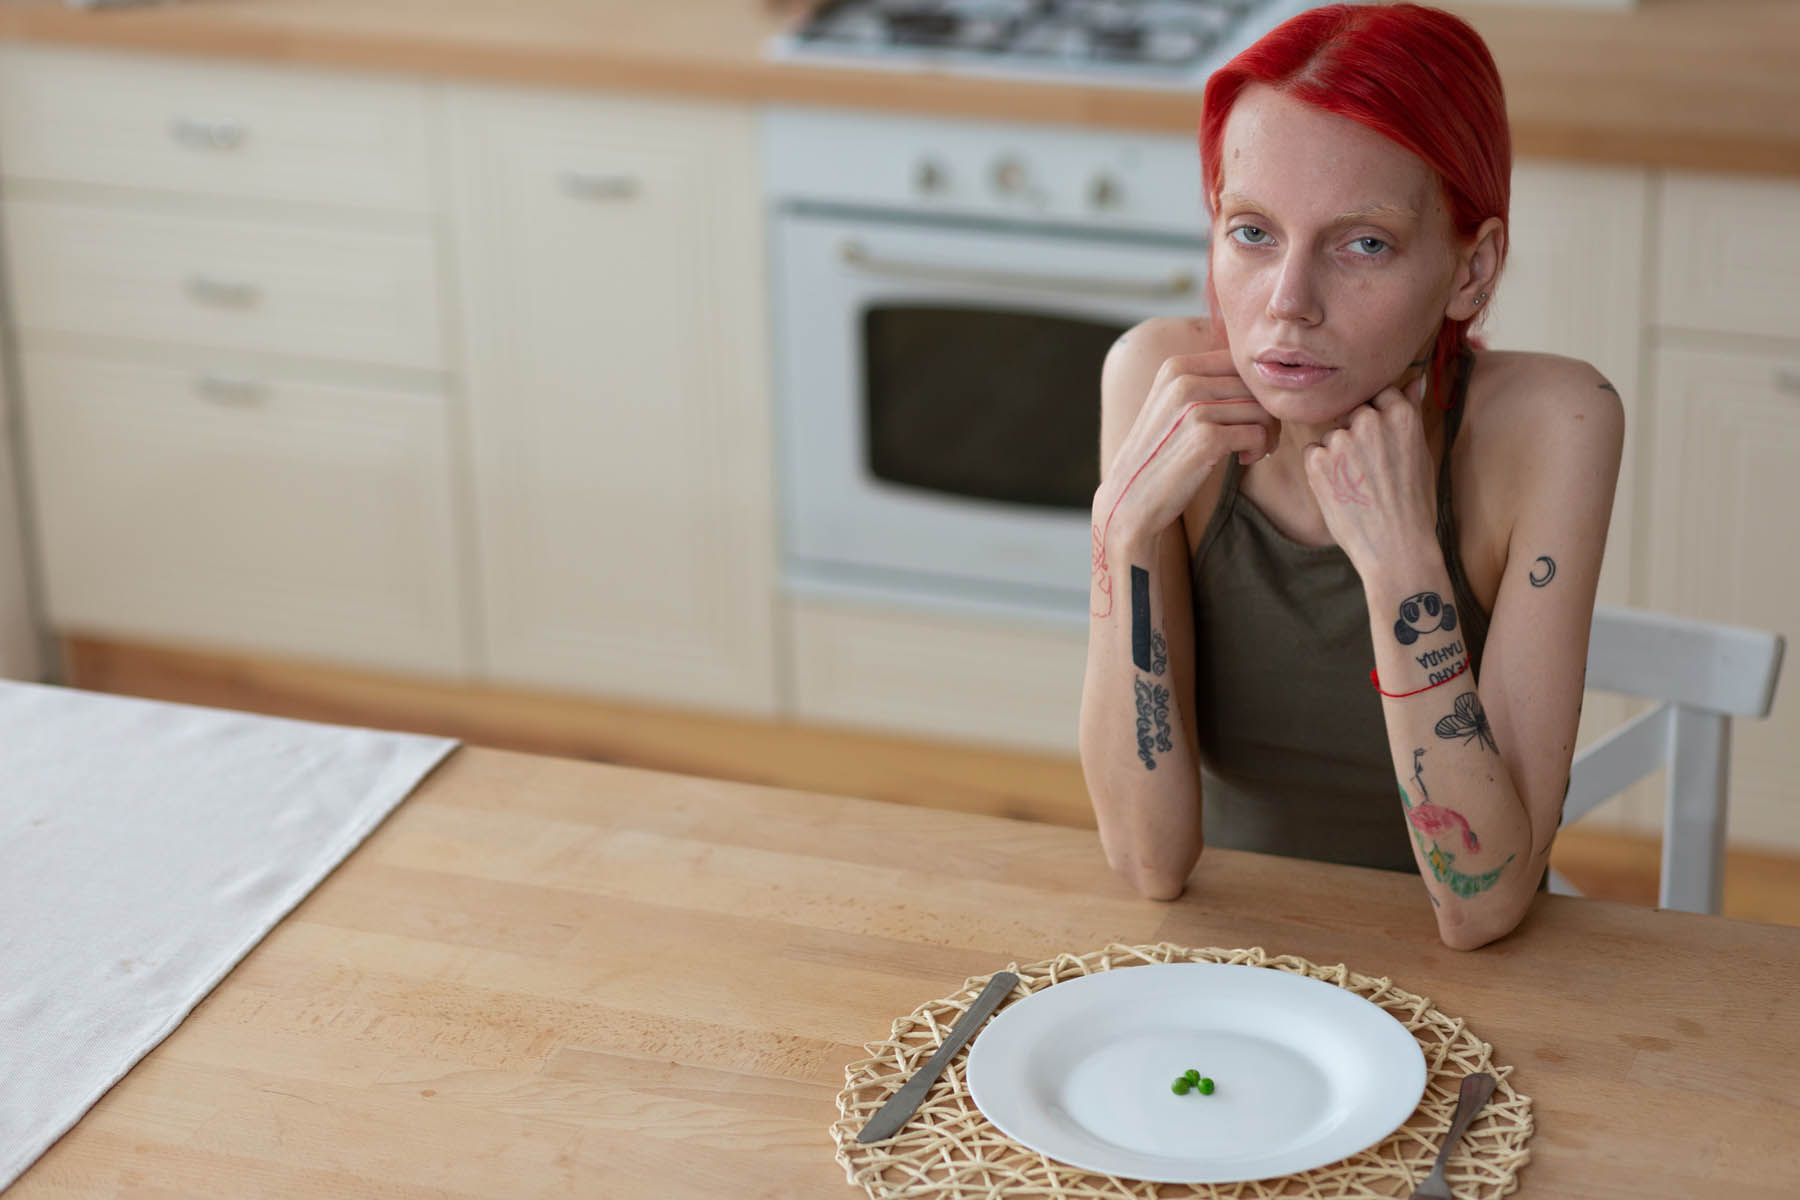 Understanding The Differences Between Anorexia And Bulimia